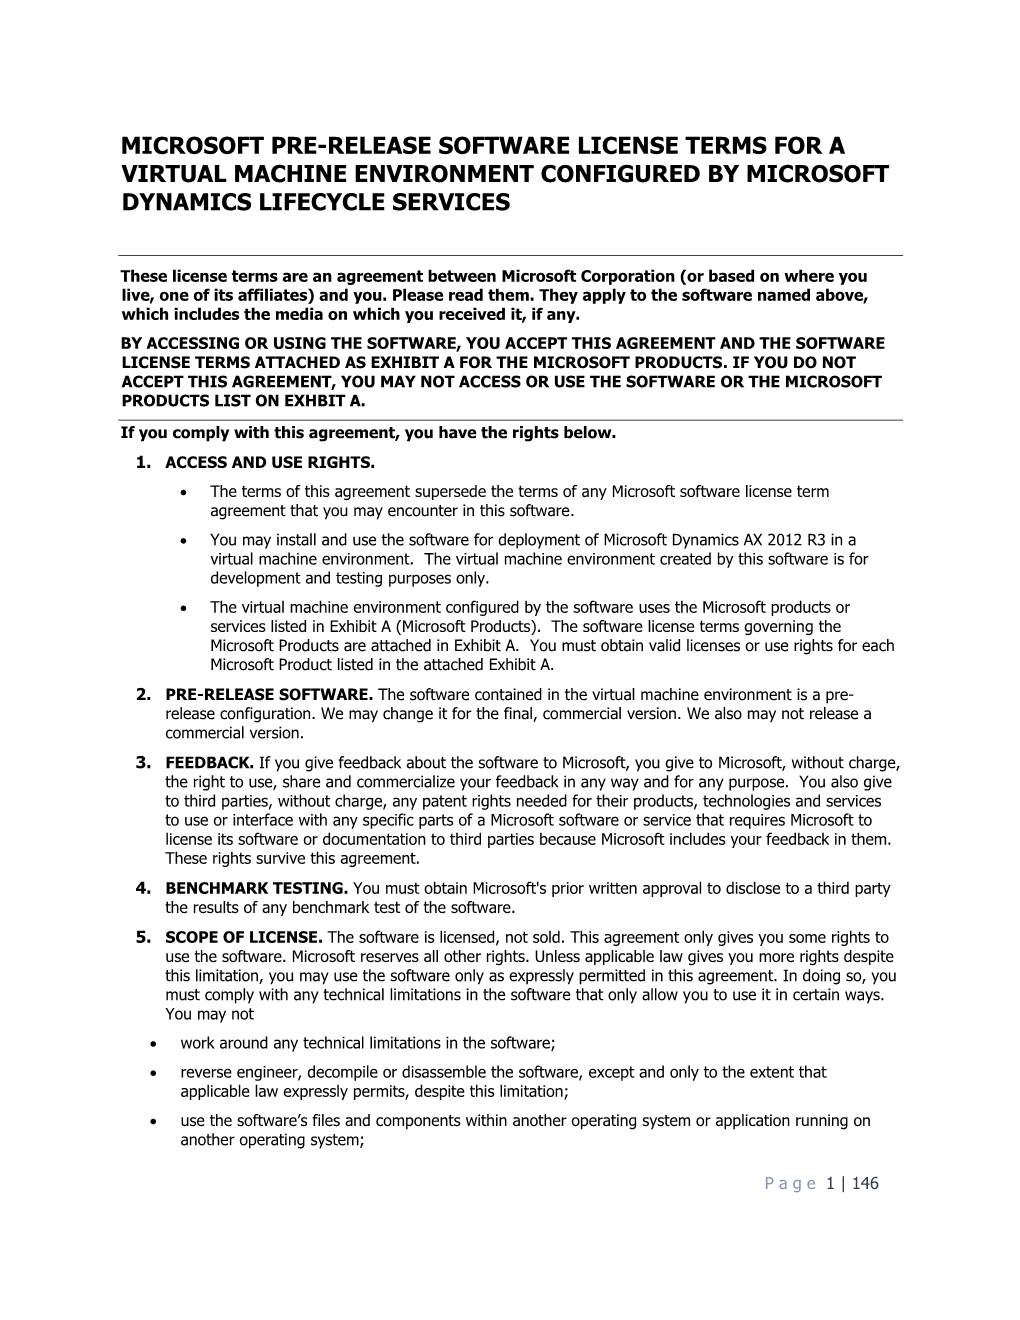 Microsoft Pre-Release Software License Terms for a Virtual Machine Environment Configured by Microsoft Dynamics Lifecycle Services